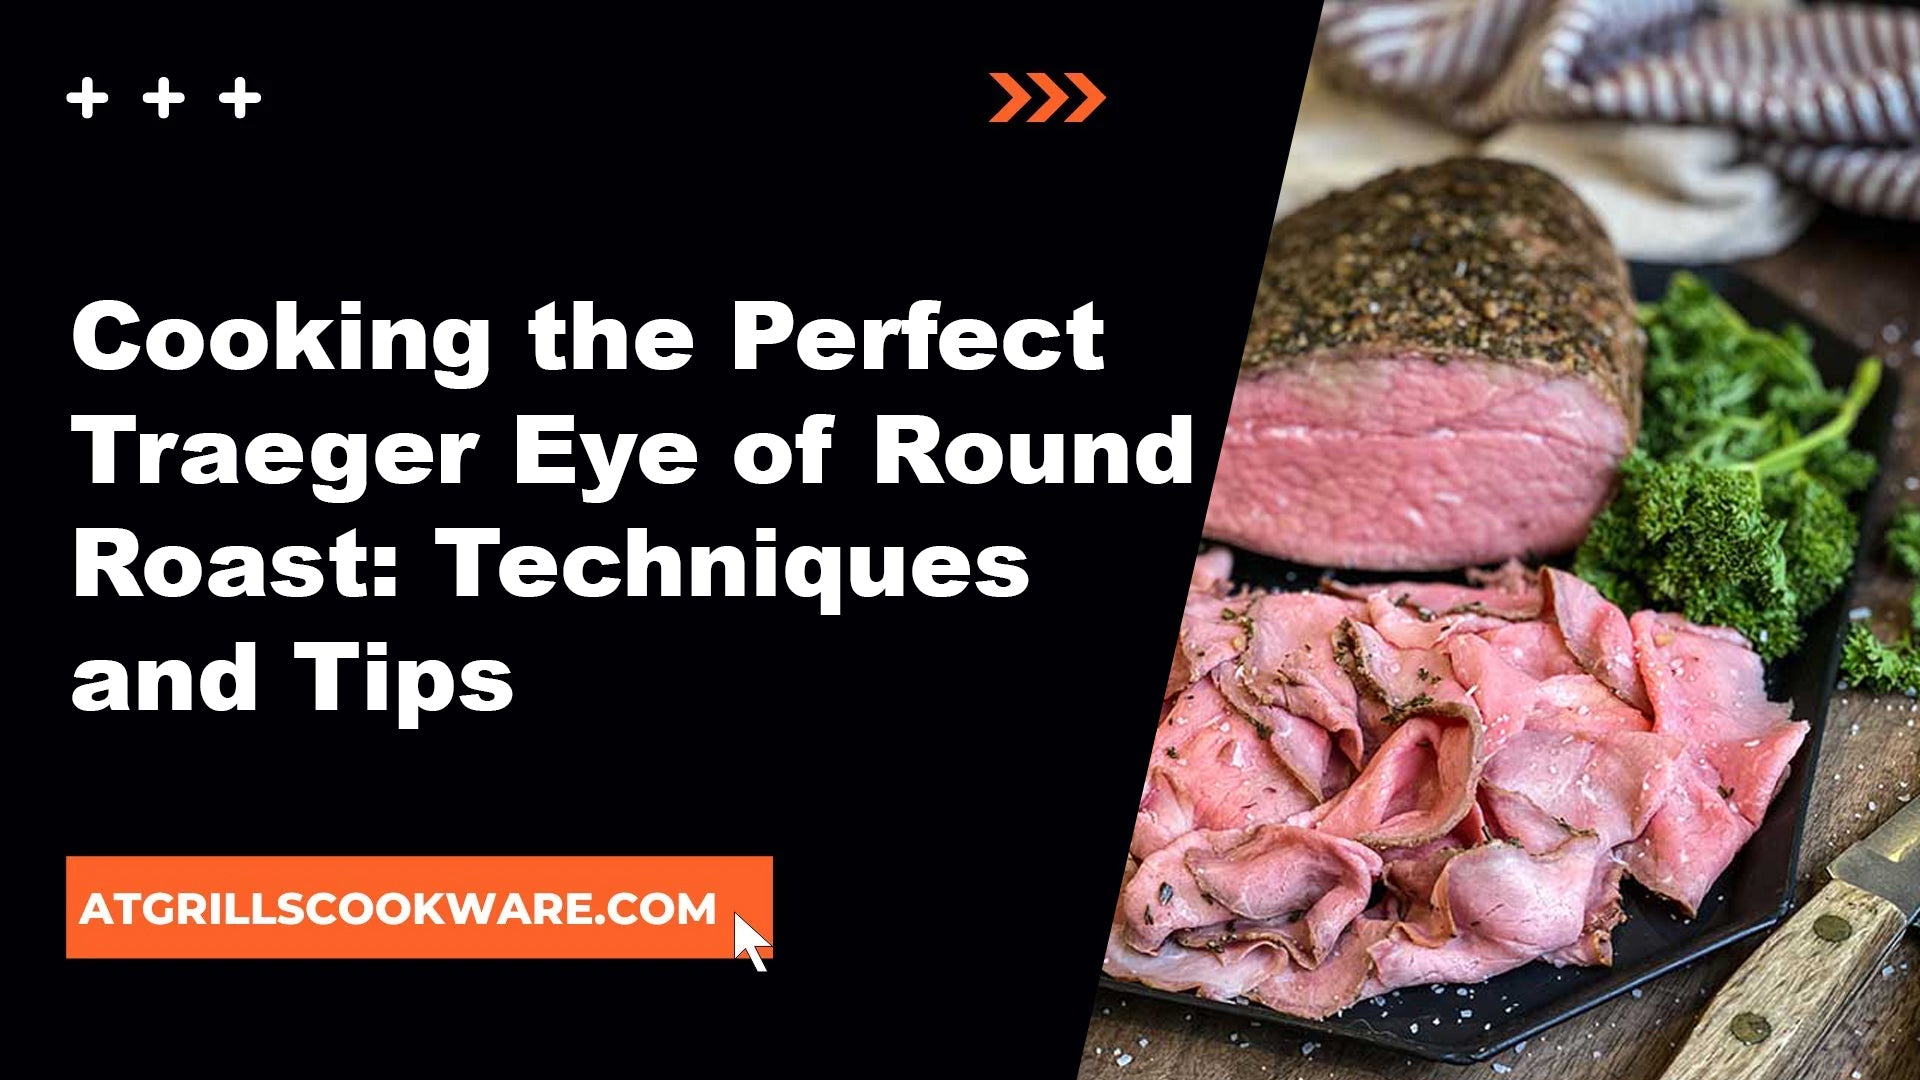 Cooking the Perfect Traeger Eye of Round Roast: Techniques and Tips